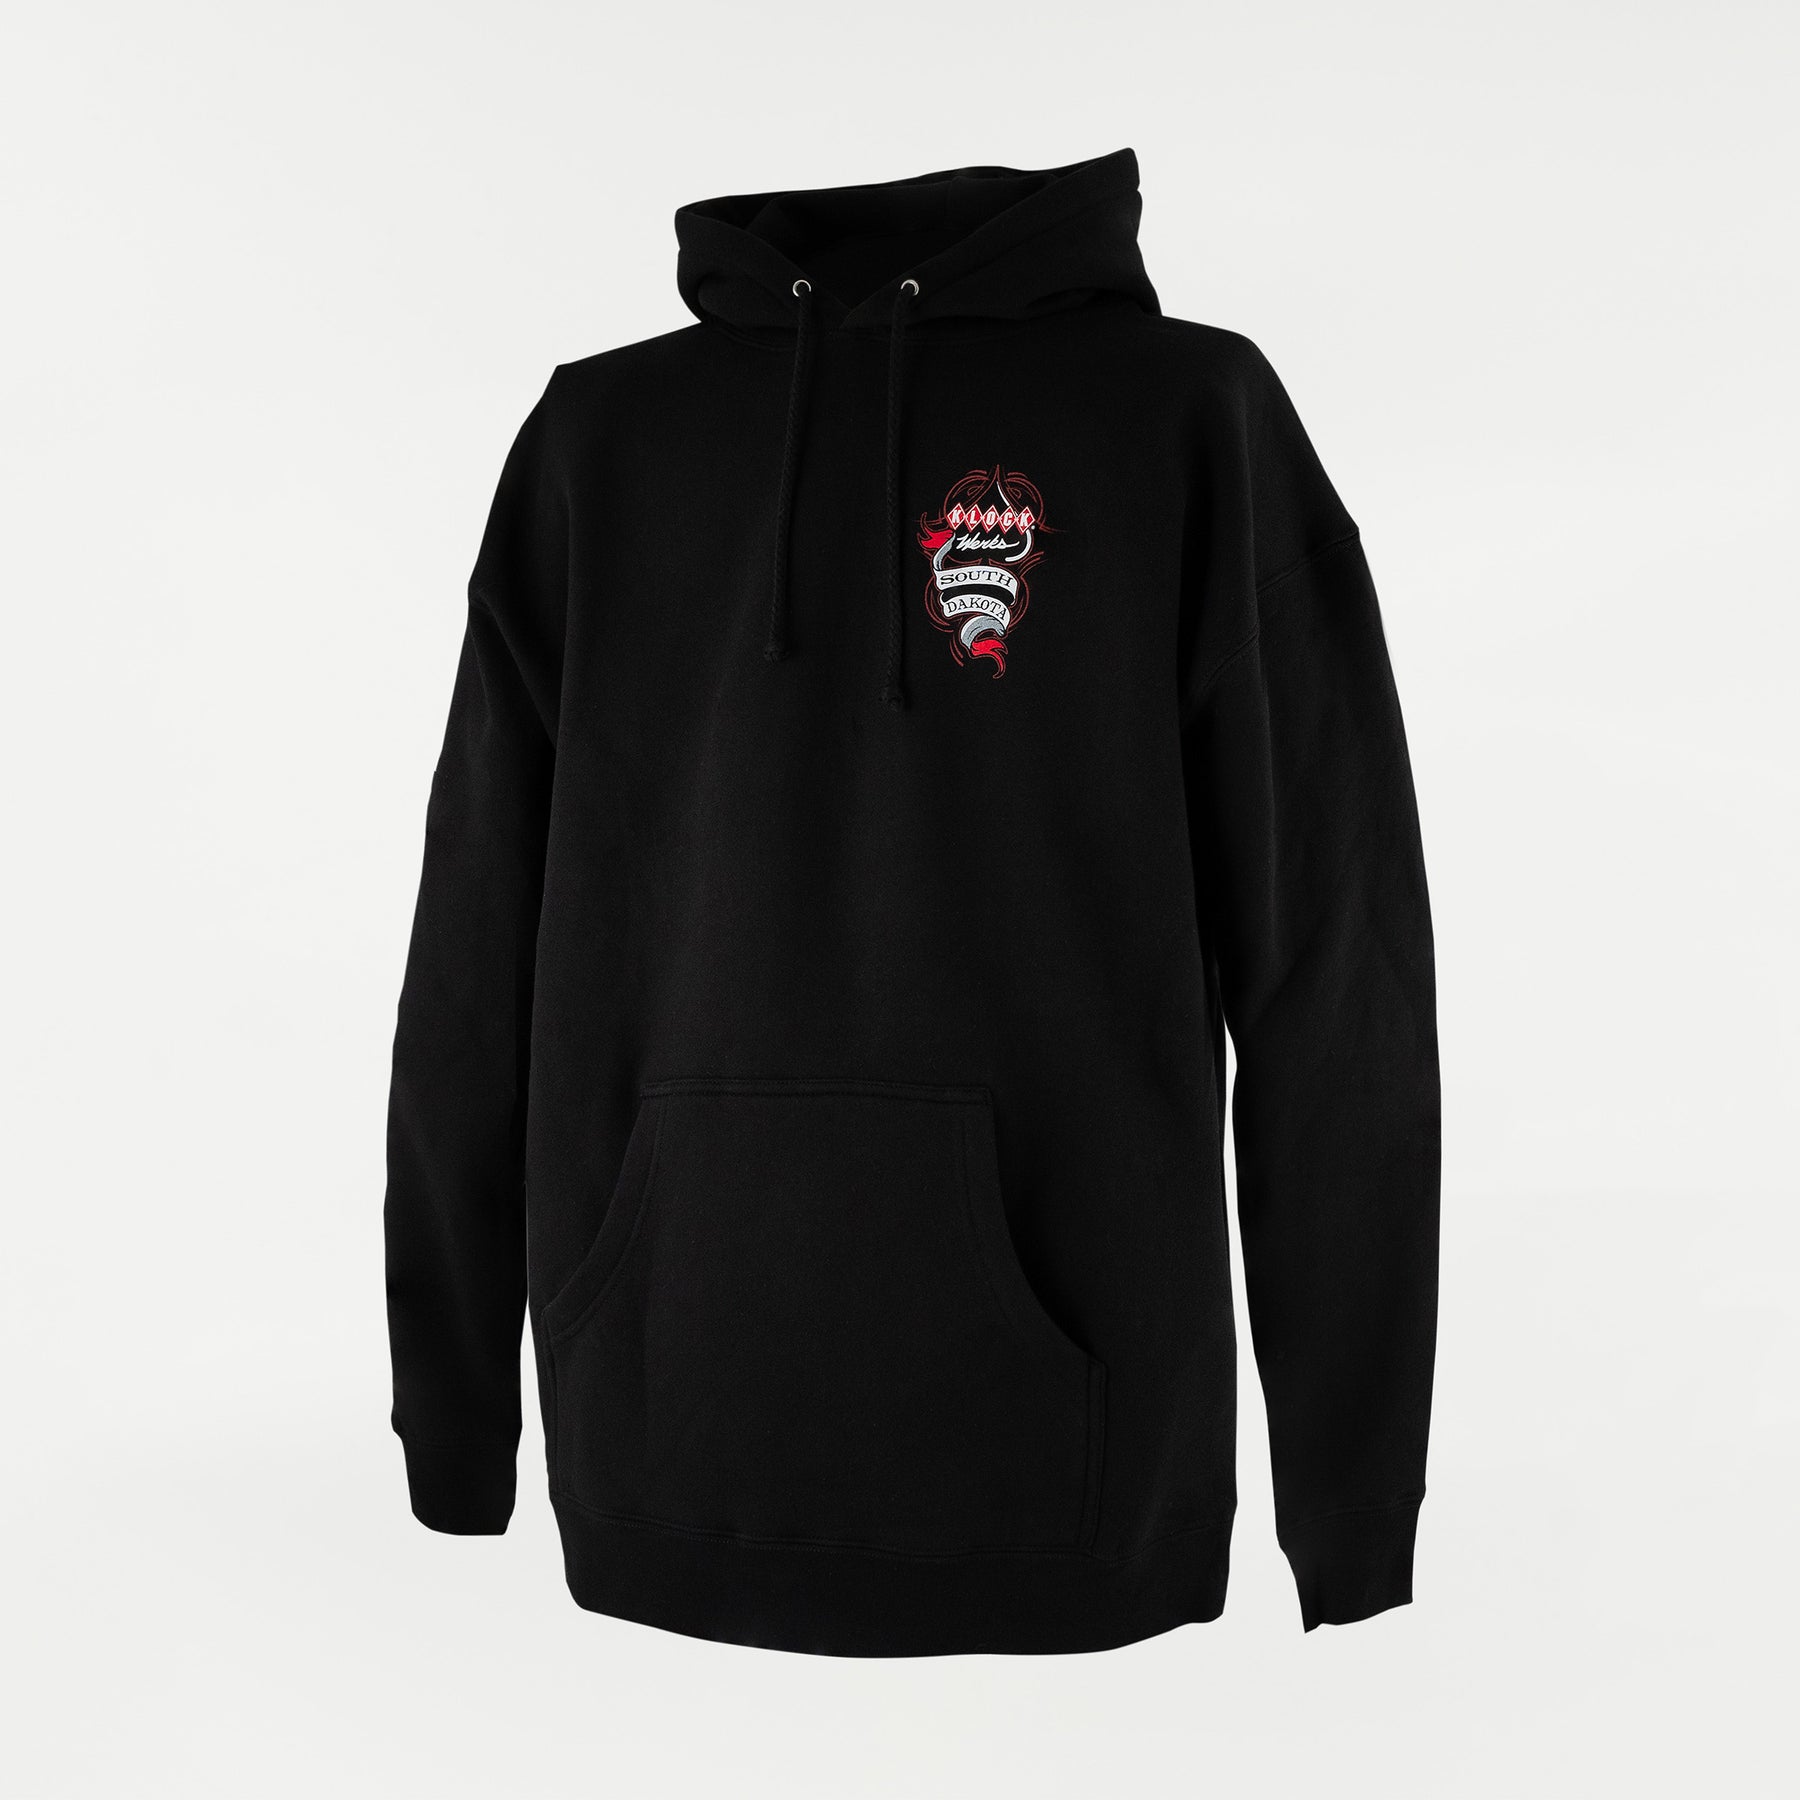 Black Pullover Hoodie with Spark Plug Design on Front Chest 